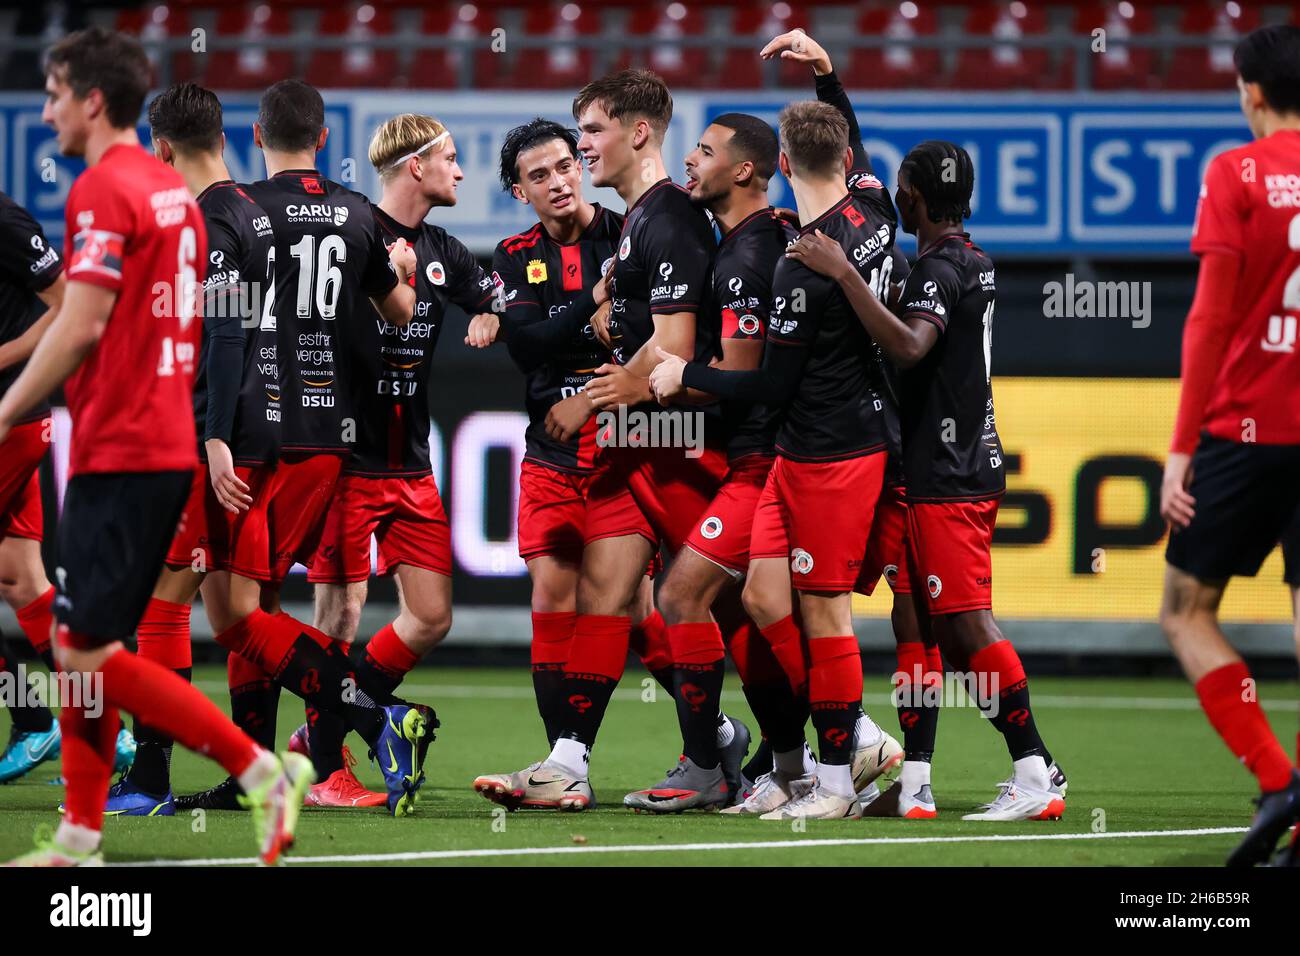 ROTTERDAM, NETHERLANDS - NOVEMBER 14: Abdallah Aberkane of Excelsior Rotterdam, Thijs Dallinga of Excelsior Rotterdam and Redouan El Yaakoubi of Excelsior Rotterdam celebrate their sides third goal during the Dutch Keukenkampioendivisie match between Excelsior and Almere City FC at the Van Donge & De Roo Stadion on November 14, 2021 in Rotterdam, Netherlands (Photo by Herman Dingler/Orange Pictures) Stock Photo